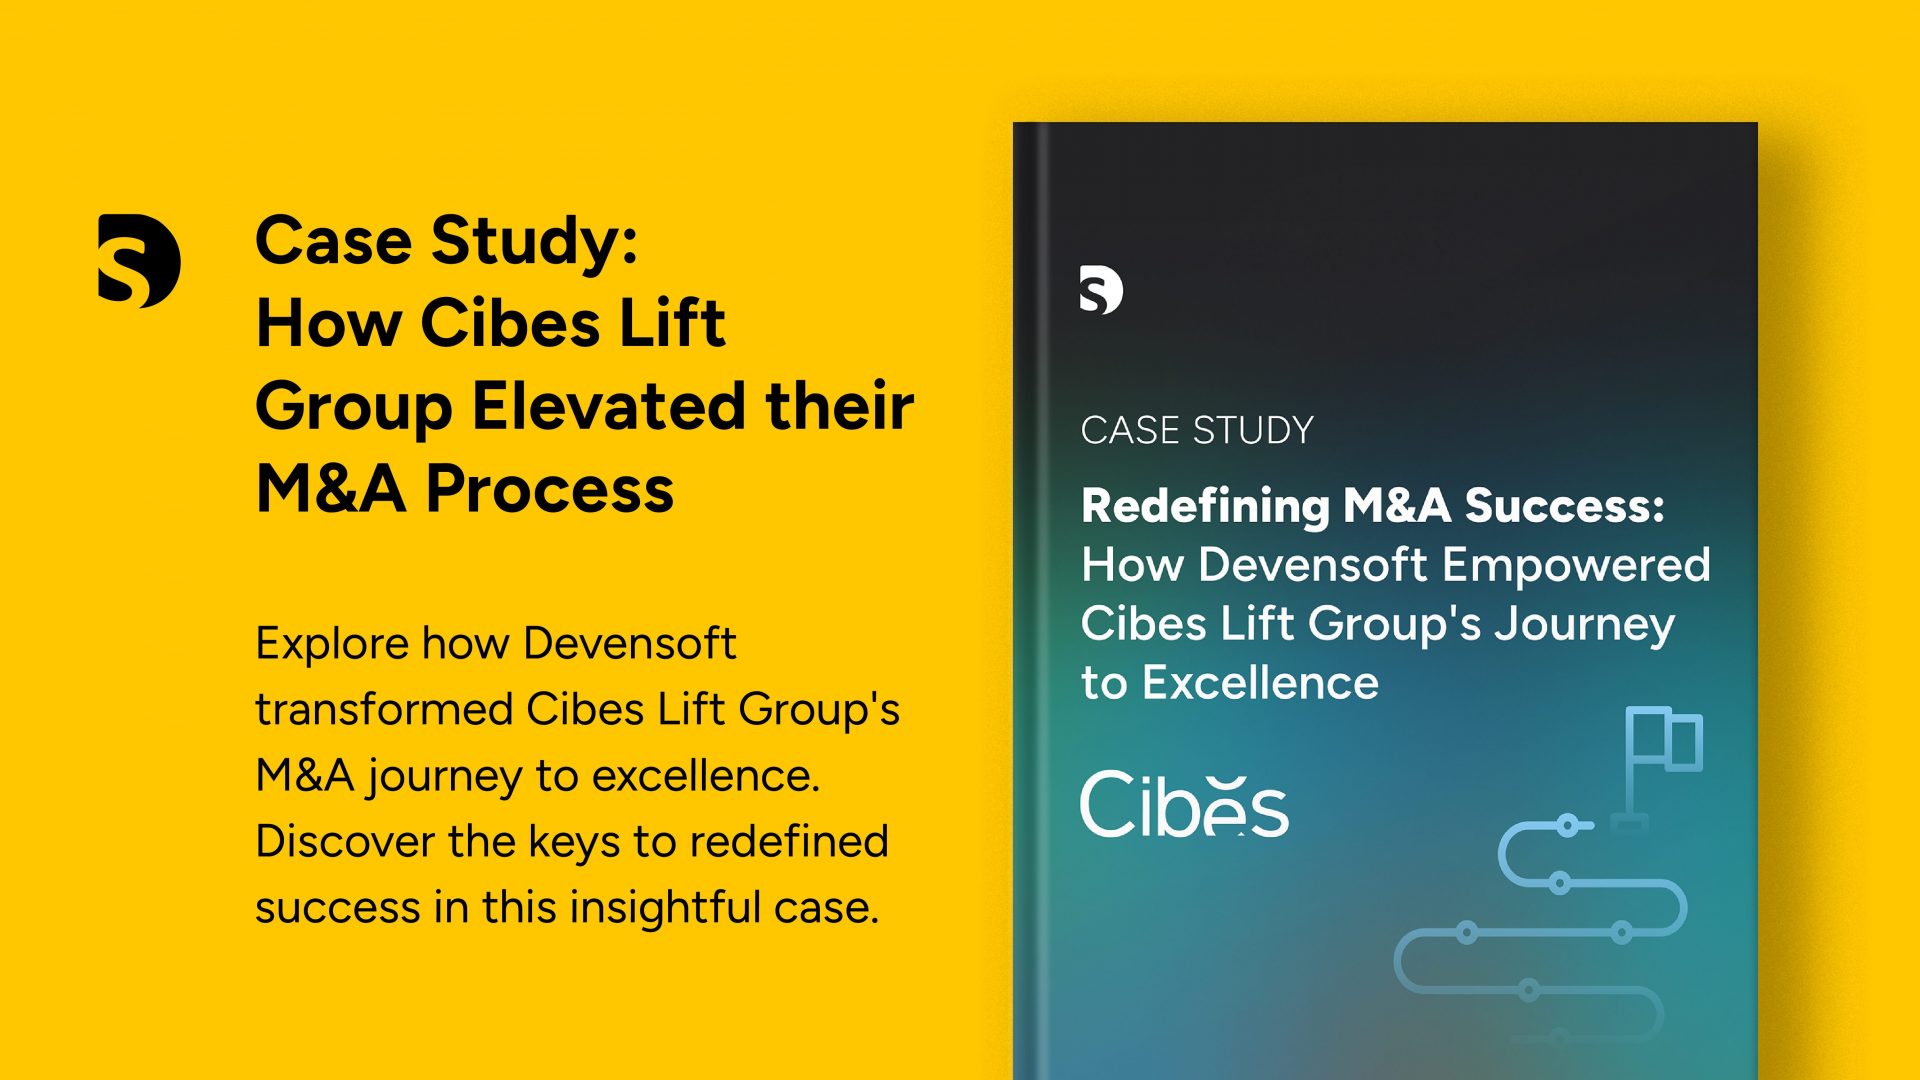 Redefining M&A Success: How Devensoft Empowered Cibes Lift Group’s Journey to Excellence